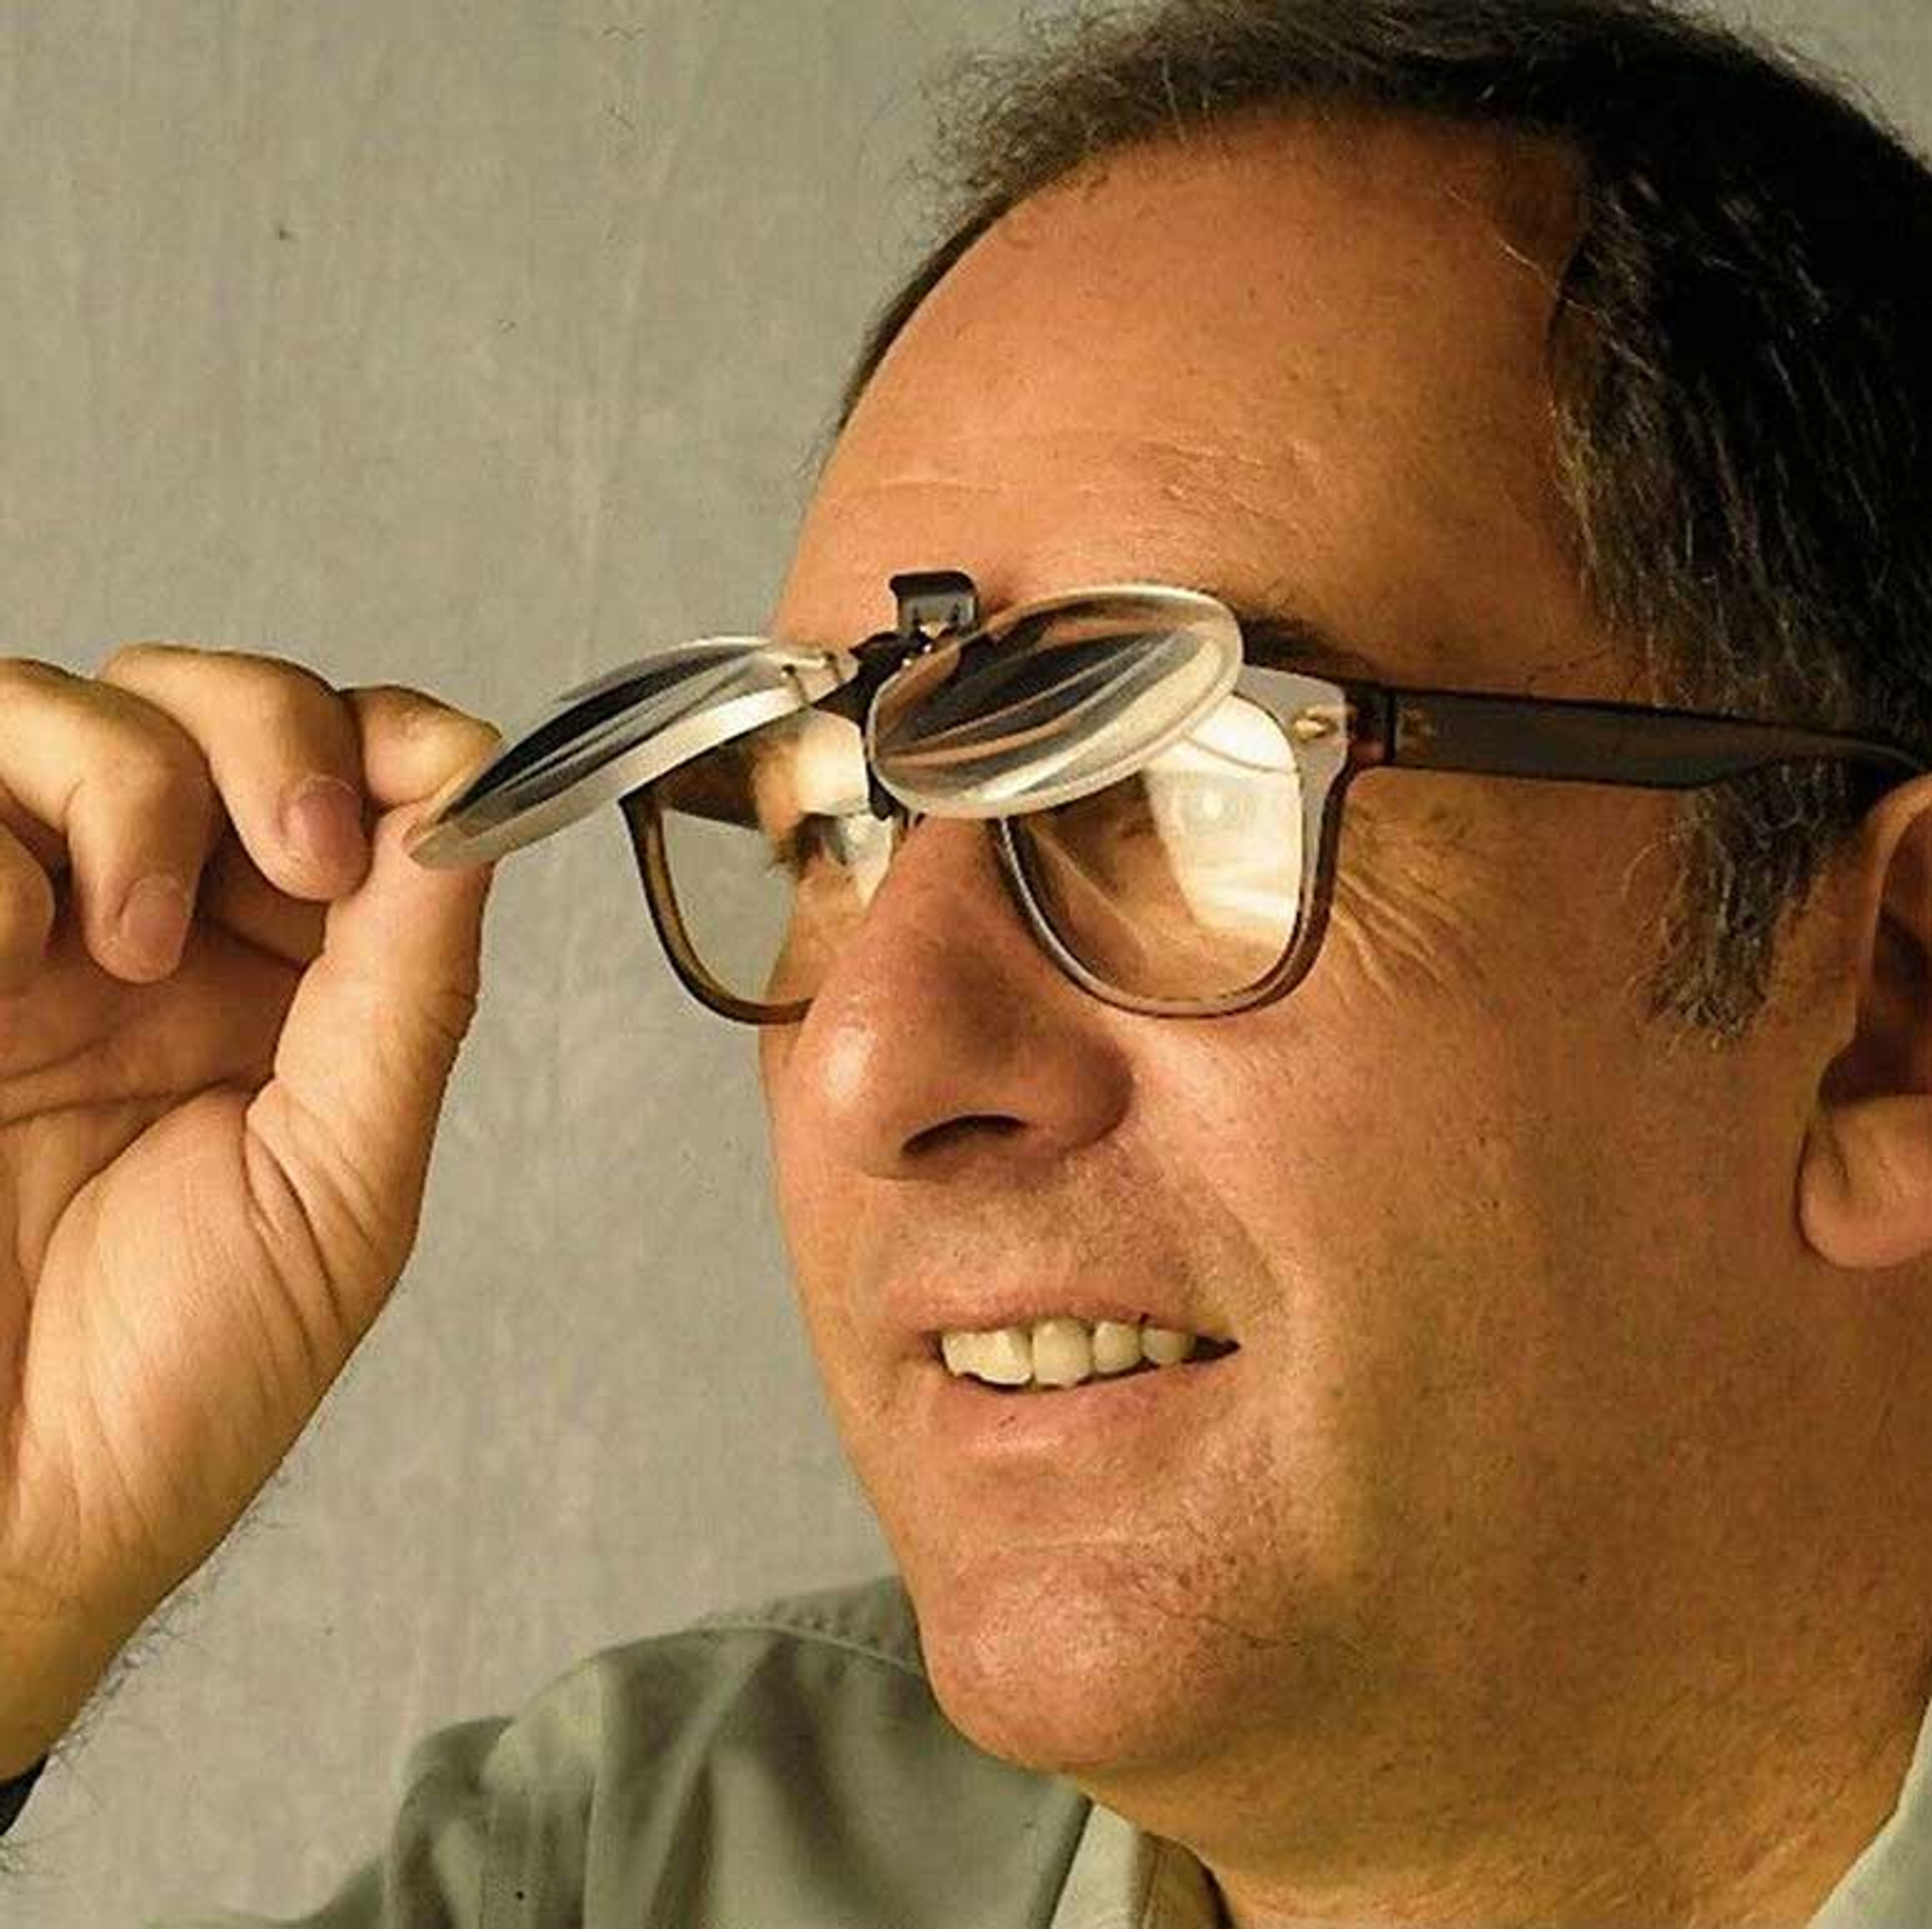 Clip-on Magnifying Glasses for Spectacles